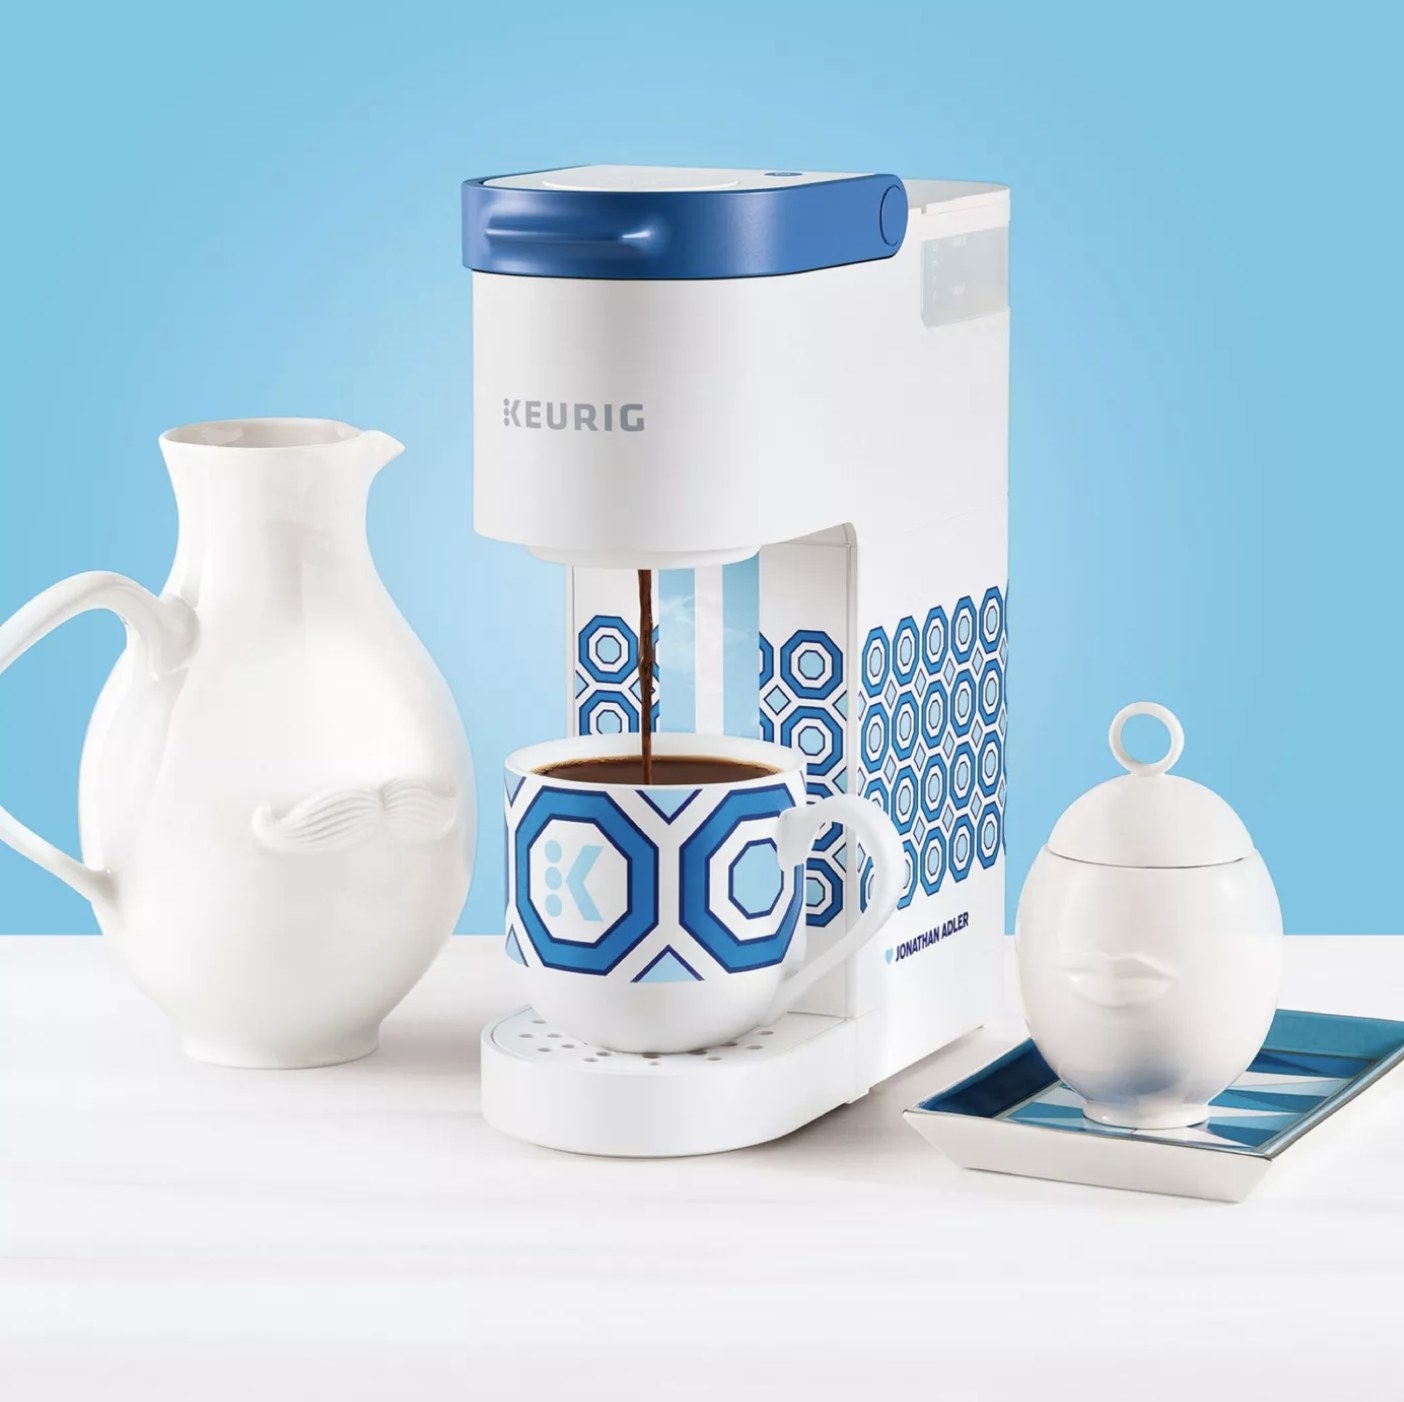 A white and blue patterned Keurig pouring coffee into a mug